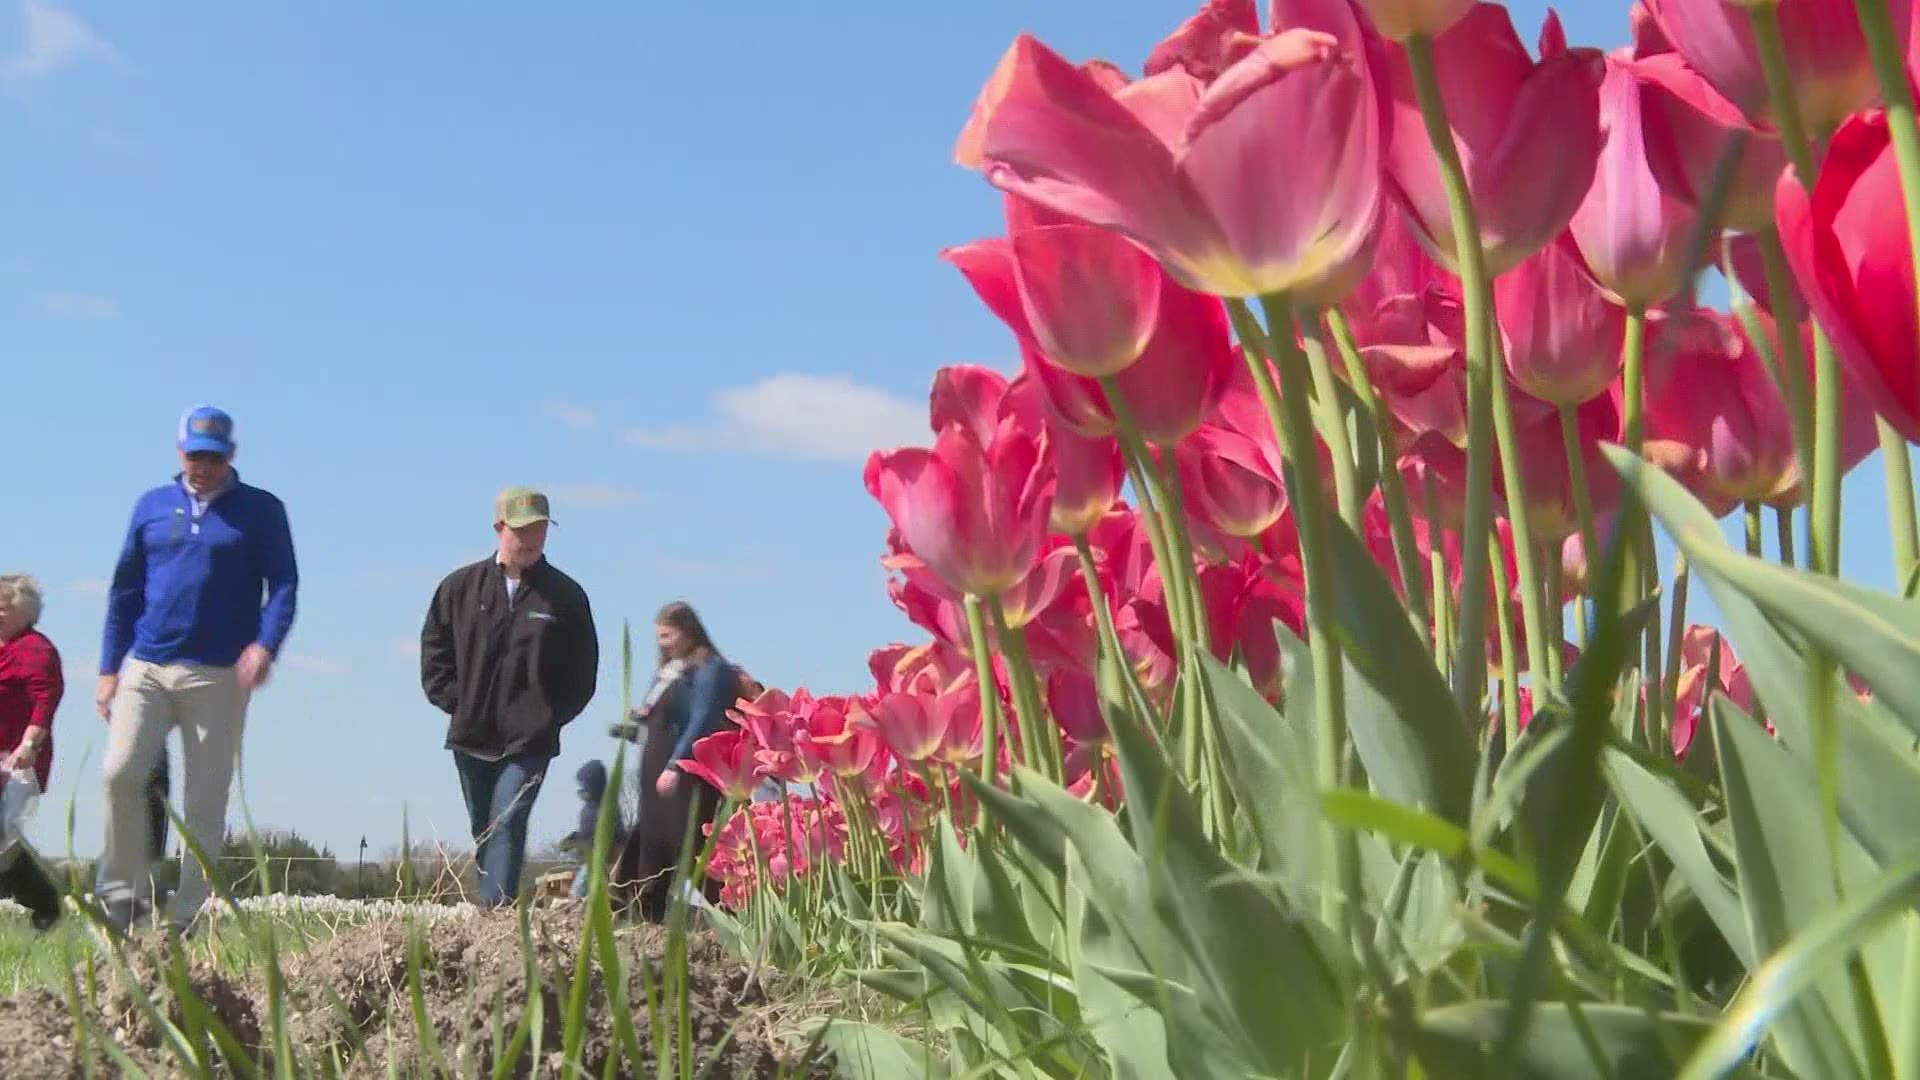 The third annual Tulipalooza kicked off Friday, March 19 at the Waxahachie Civic Center. There will be live music, food and 250,000 tulips to take home.